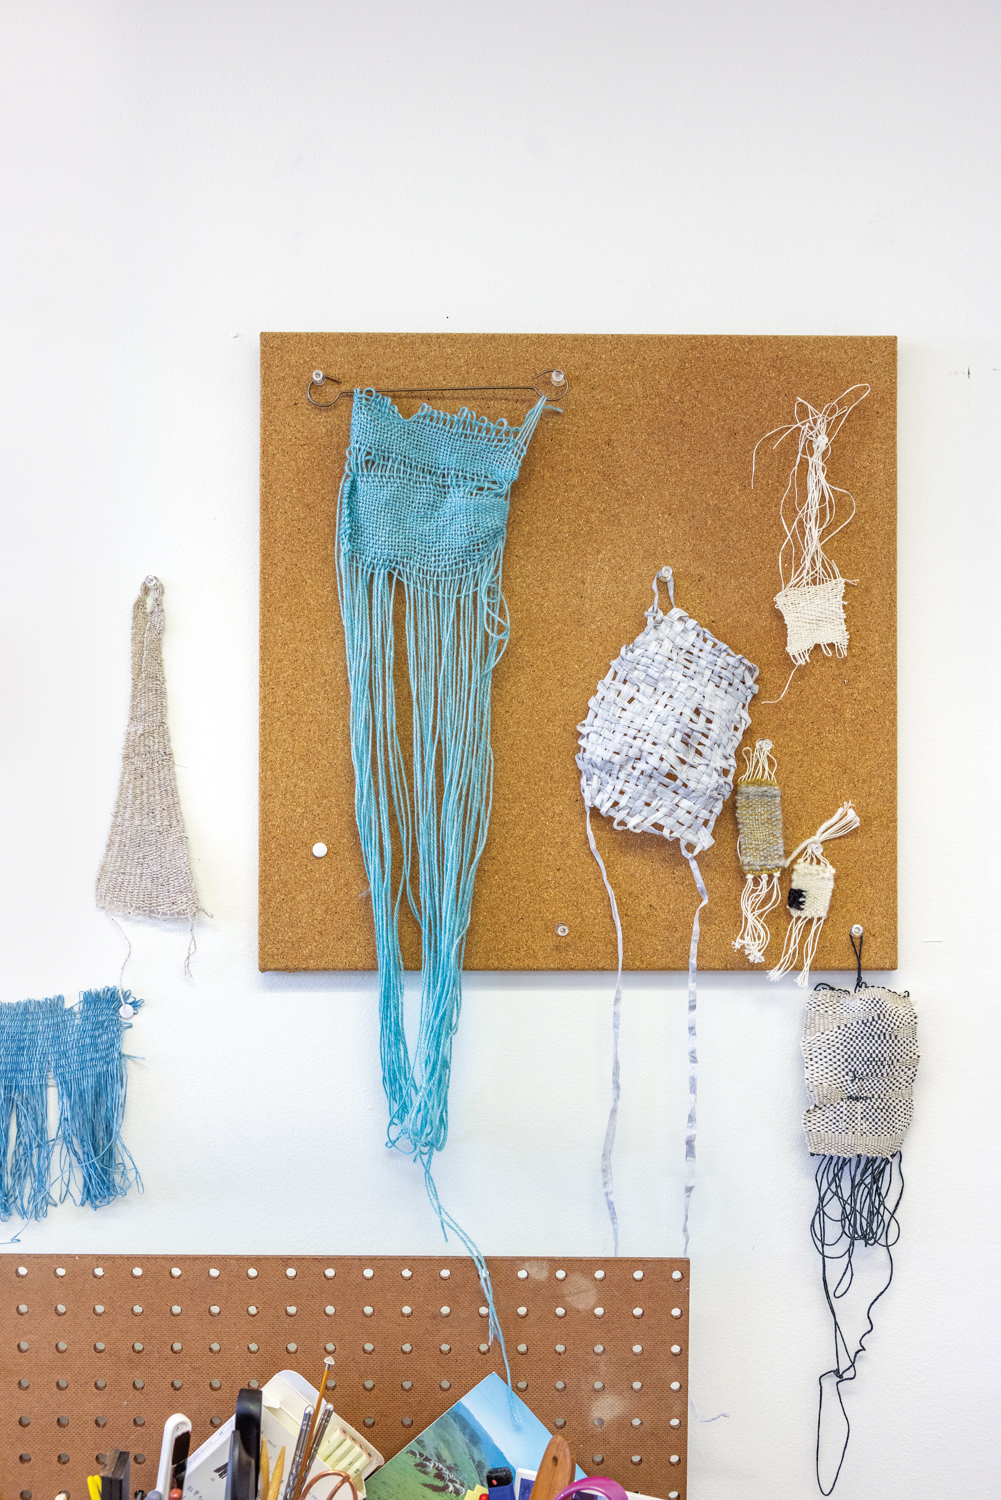 free form woven textiles hang on a corkboard